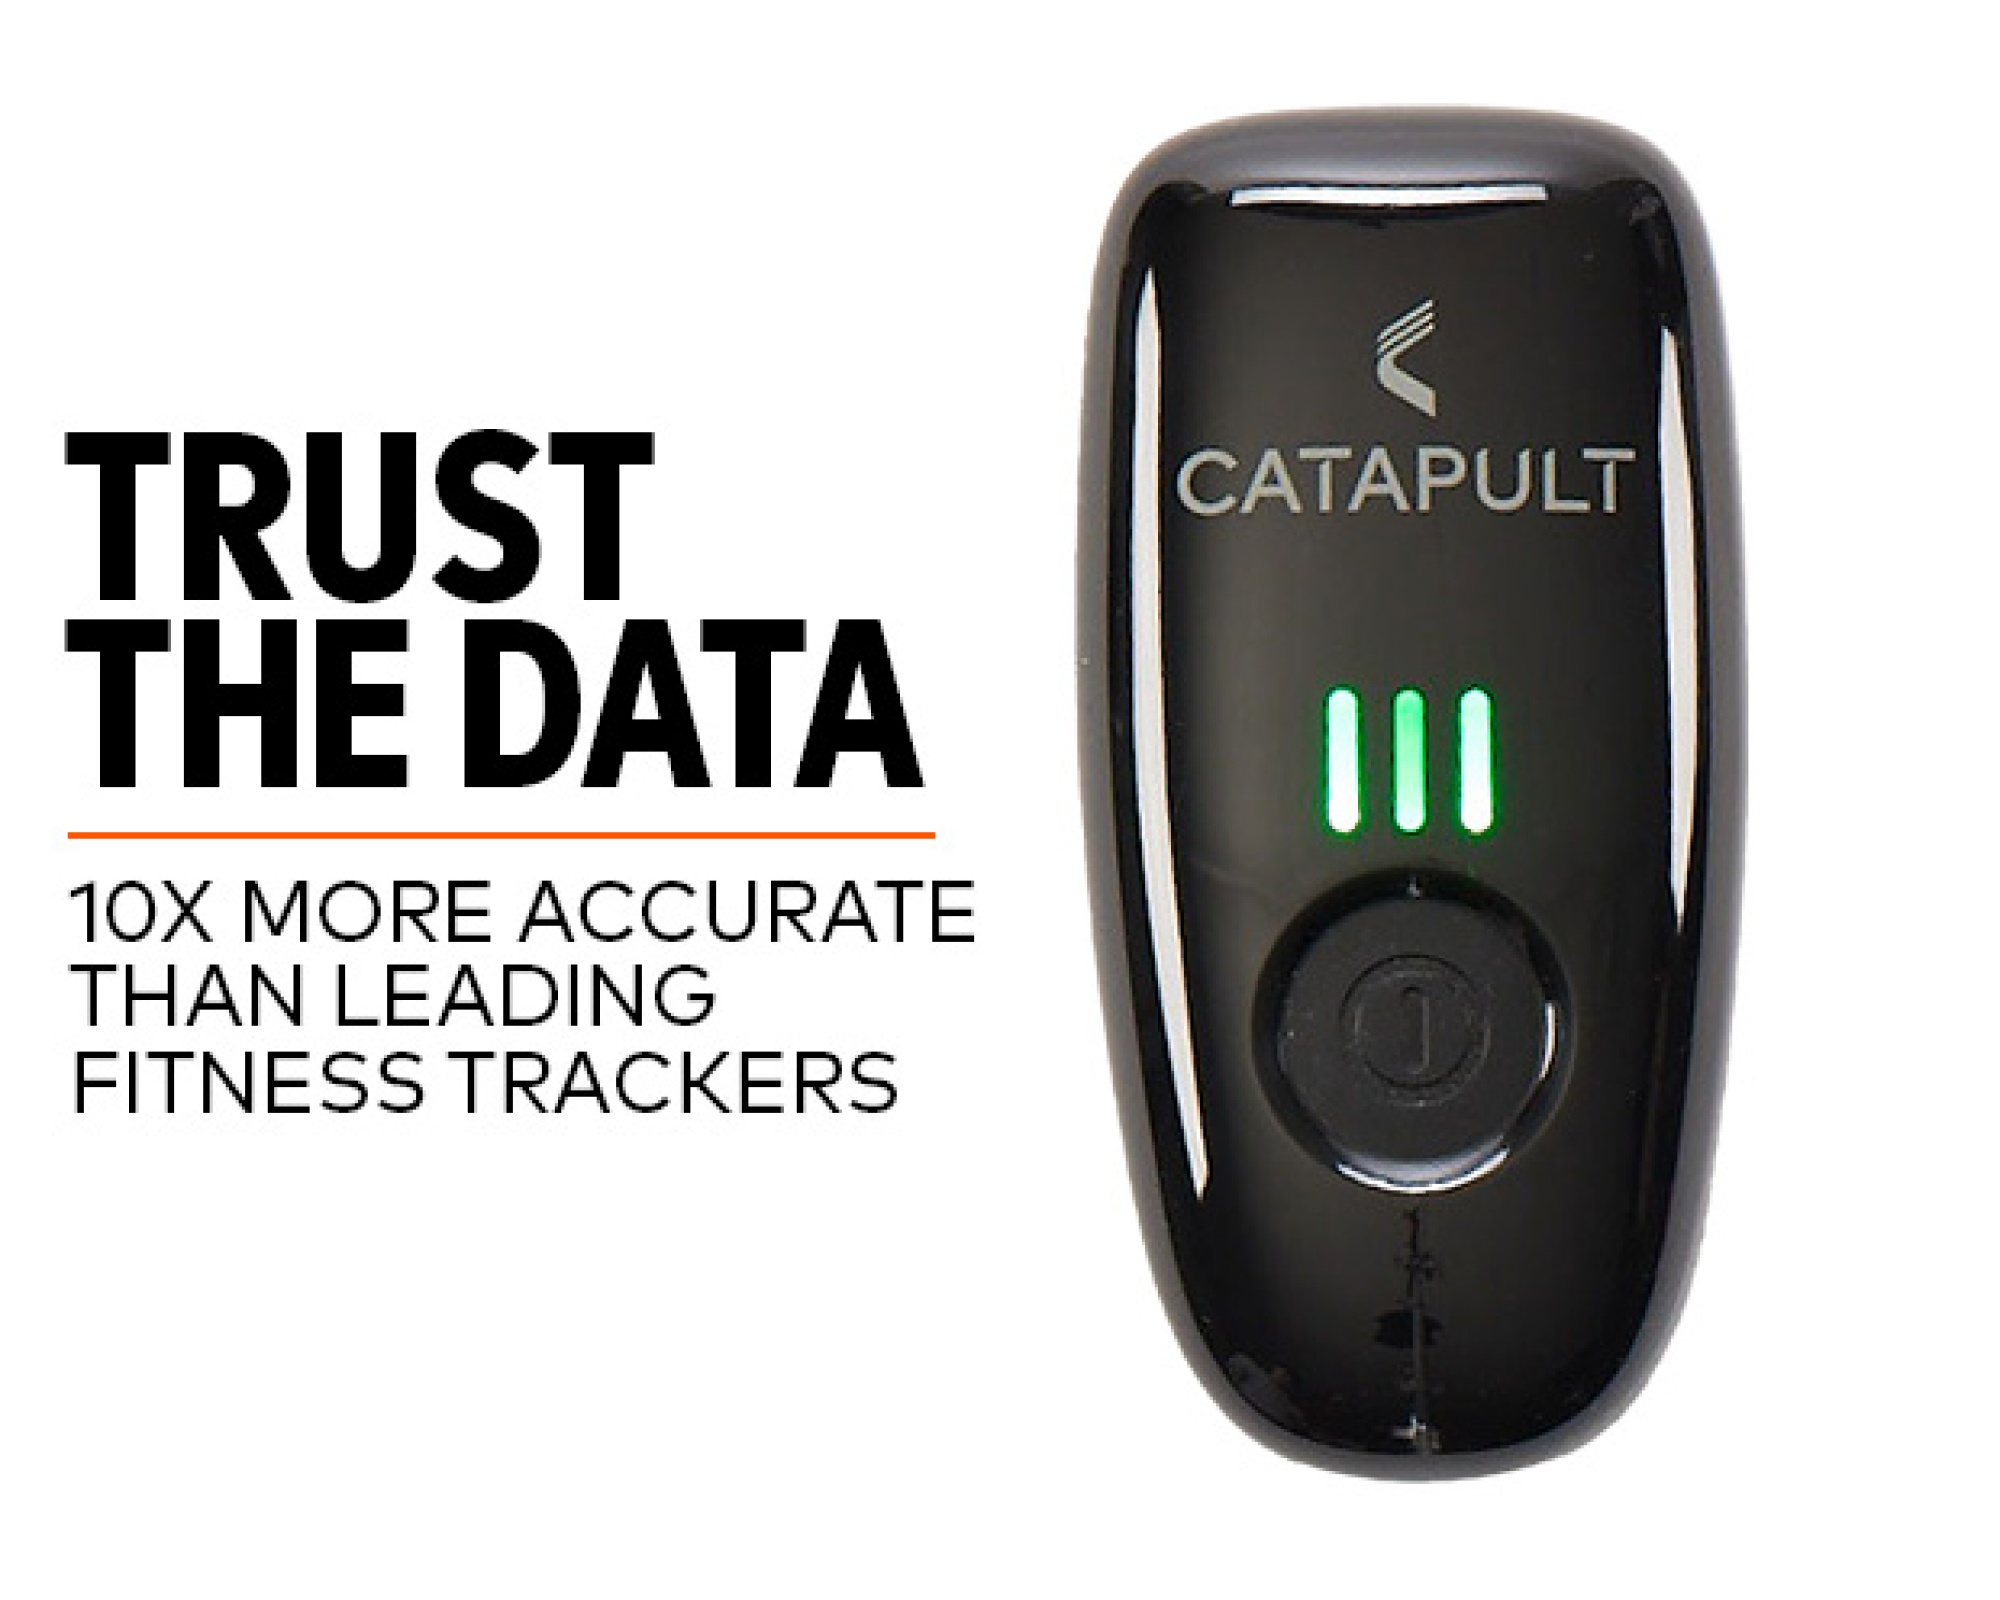 The NEW Catapult One - The Best GPS Tracker Ever? 